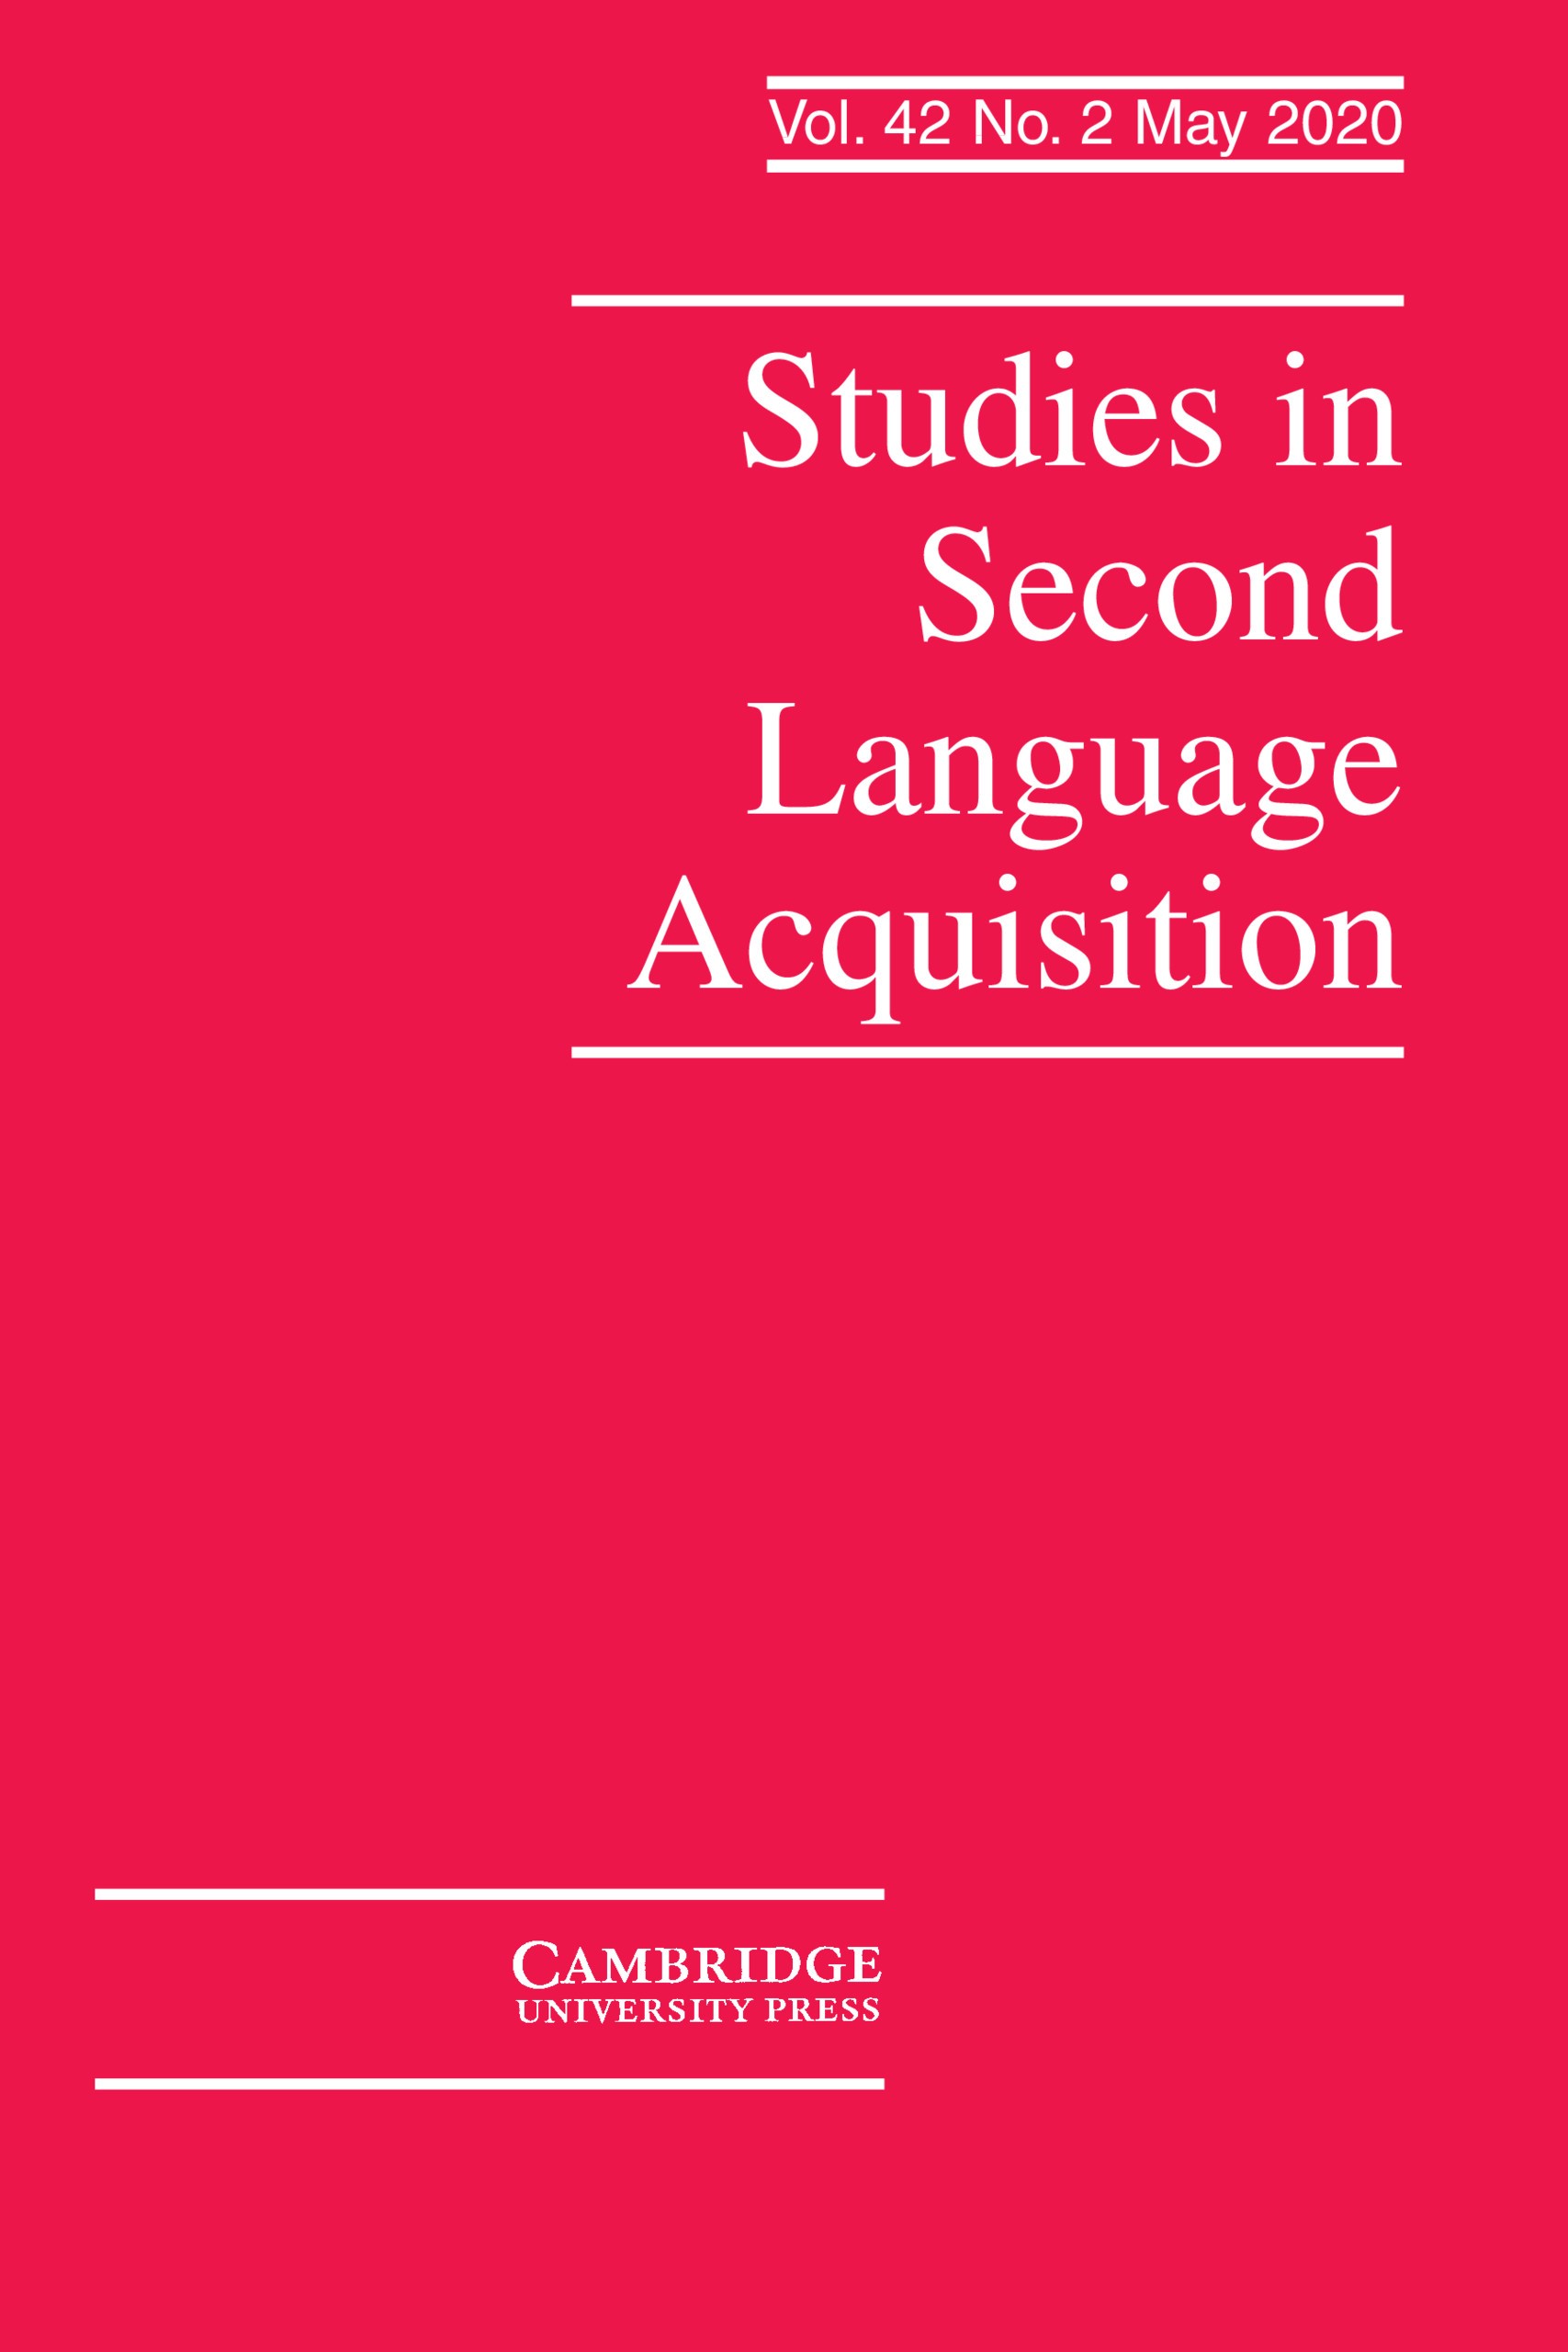 research article on second language acquisition